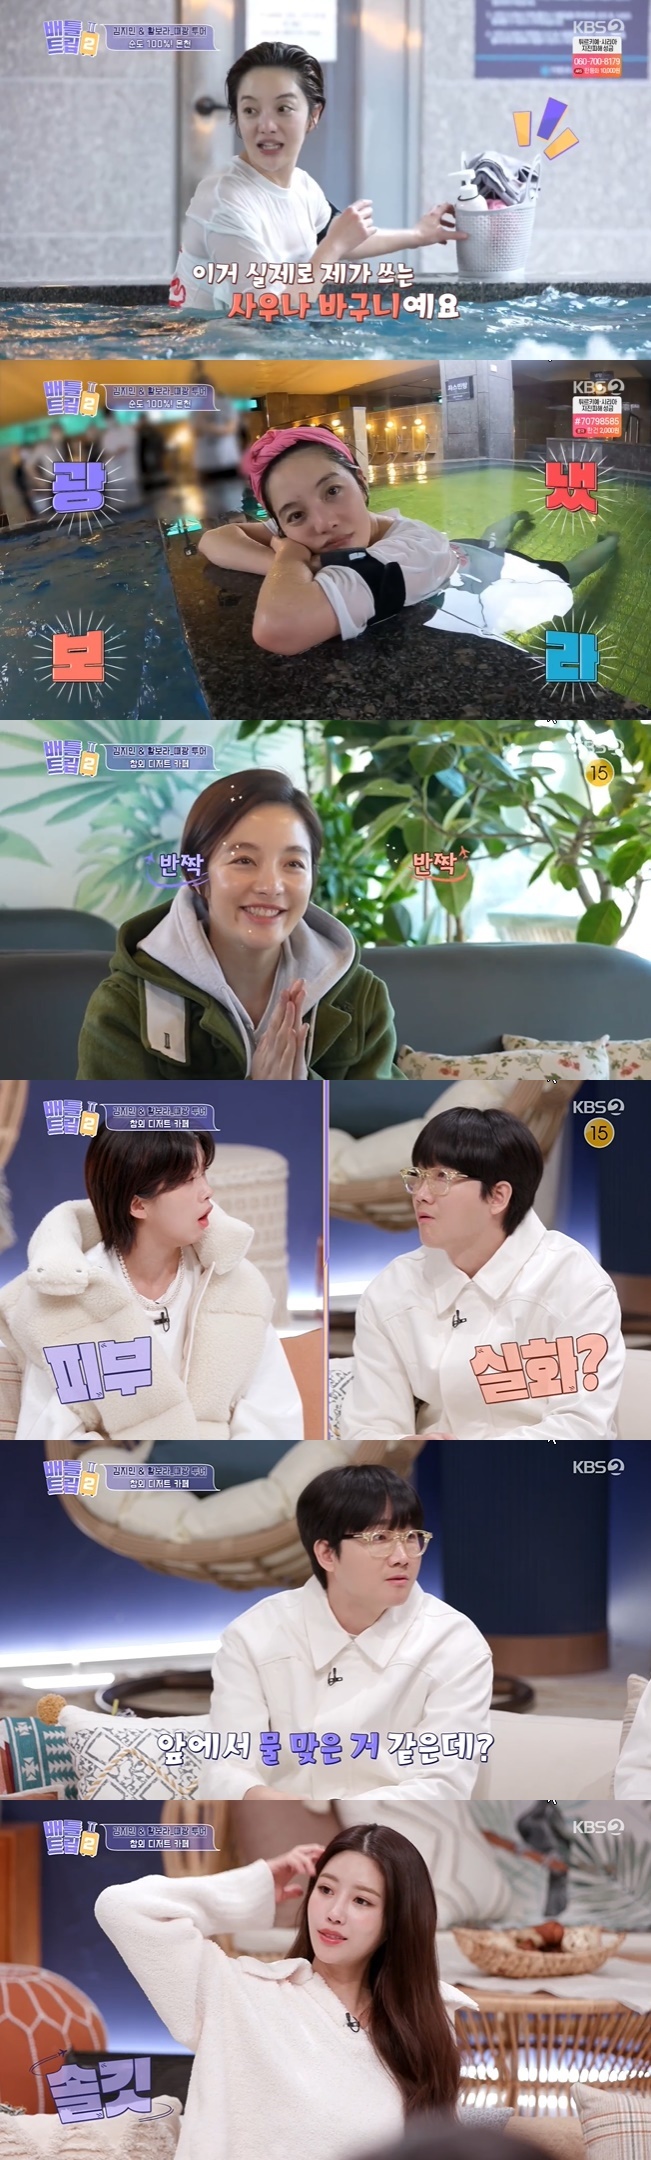 Hwang Bo Ra wows with glowing Skins after Hot SpringsKim Ji-min and Hwang Bo Ra enjoyed the hot spring of Sungju in KBS 2TV  ⁇  Battle Trip  ⁇  broadcast on February 18th.Hwang Bo Ra said, Even if I go to a local shoot, the sauna there goes unconditionally. I push the time there. So I was really looking forward to the Hot Spring.Two people arrived at Hot spring and got into the bath with alkaline Hot spring water. Hwang Bo Ra, who entered the bath without worrying, was delighted that the smell of the bath was so good.Kim Ji-min, who hates the bathroom, screamed at the hot spring water, but was satisfied that the water was slippery.Hwang Bo Ra, who goes to the sauna five days a week, unveiled the bath basket he carries in his car. Hwang Bo Ra took out the massage tool from the basket and rubbed his face and even shiatsu.Kim Ji-min admitted that her sister is a veteran.Kim Ji-min, who saw Hwang Bo Ras bare face during the bath, praised it as pretty and learning to learn. Hwang Bo Ra said that his face was rotten these days.Hwang Bo Ra finished his bath after enjoying the dry sauna.The two moved to the Oriental melon dessert café, where Hwang Bo Ras face appeared waiting for the drinks and bread he ordered, and Aiki was surprised to see that  ⁇ Skins had improved.The glittering Hwang Bo Ra face Sung Sik Kyung said that he had applied cooking oil to his face.Kim Ji-min said, I do not know what to do. Kim Ji-min said, I do not know what to do. Lee Yong-jin said, I think I was hit by water in front of me.